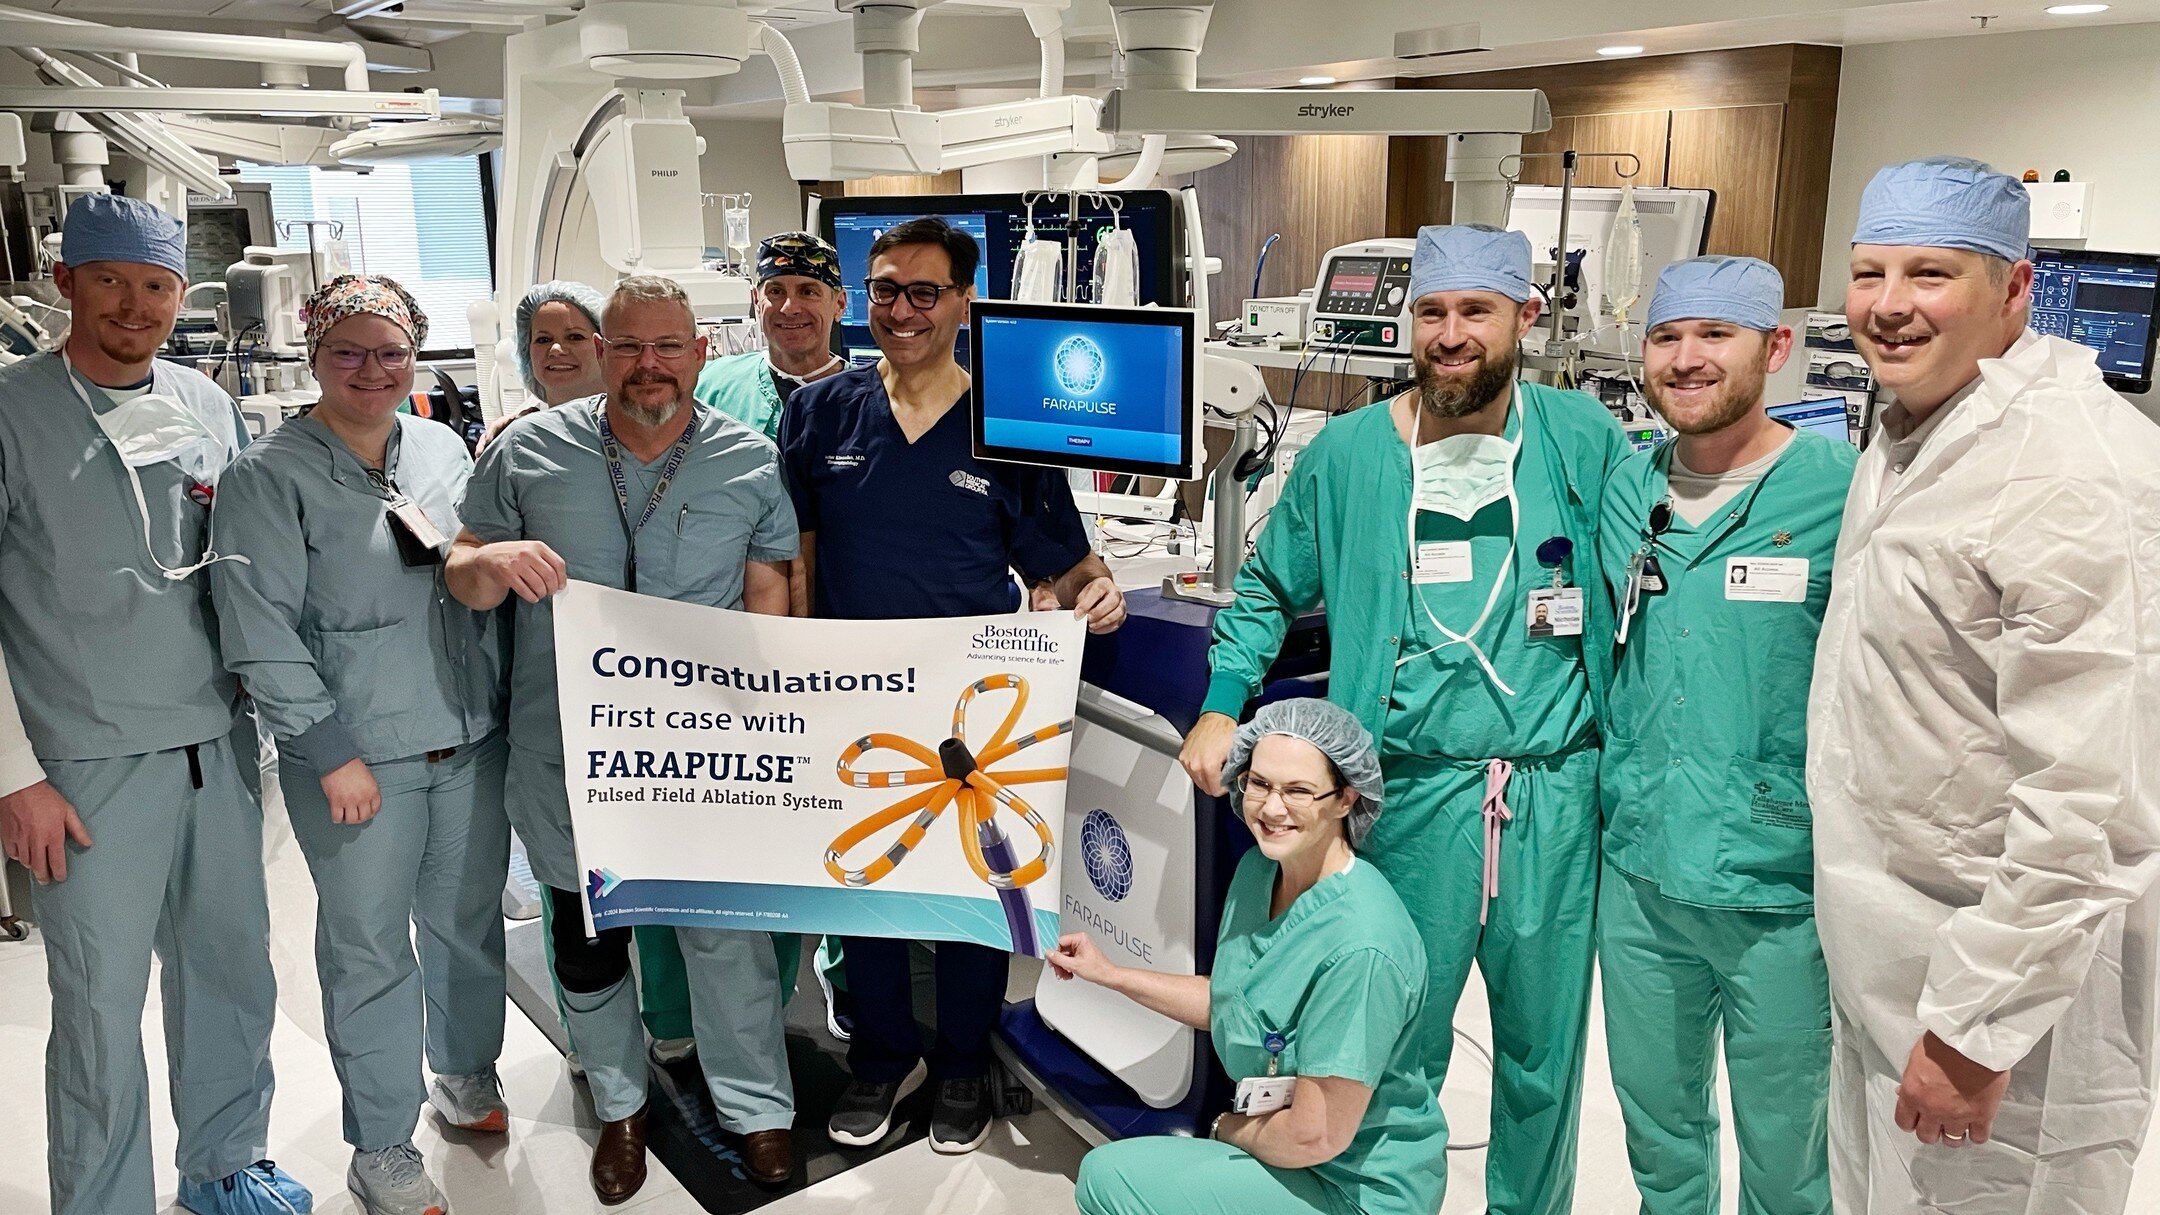 🎉Big news for Southern Medical Group! Today Farhat Khairallah, M.D. and his team performed the first FARAPULSE TM case in Tallahassee, and the second in the state of Florida. Boston Scientific&rsquo;s FARAPULSE pulsed field ablation (PFA) system is 